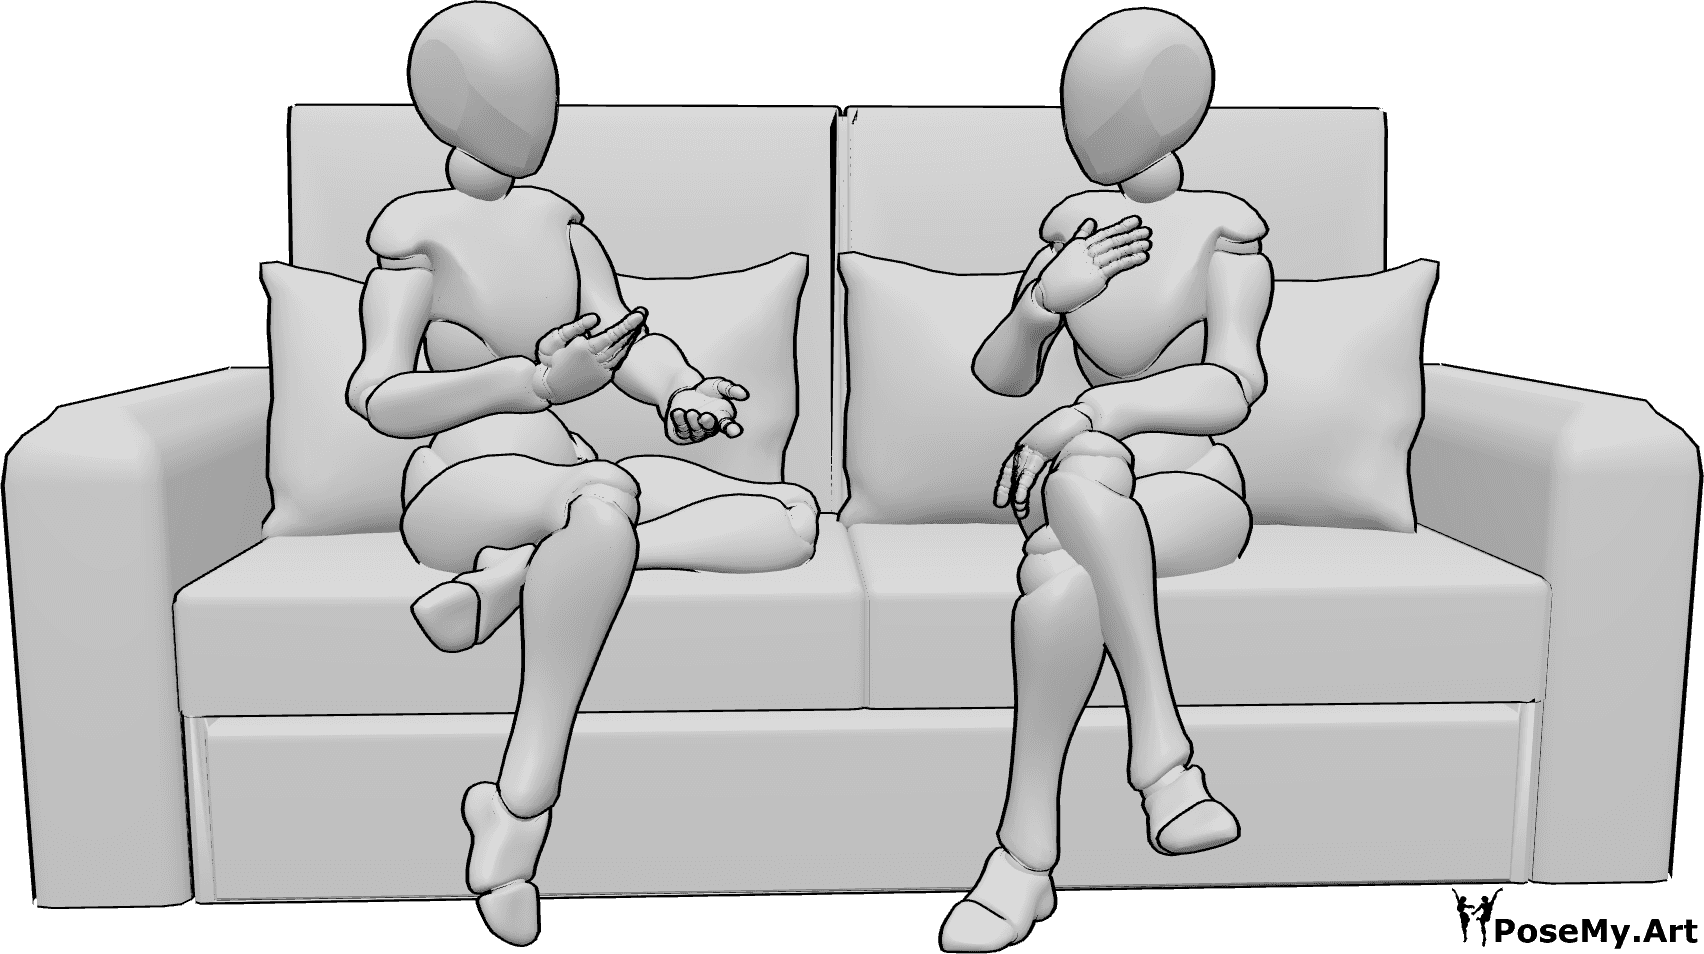 Pose Reference - Females sitting casual conversation pose - Two females are sitting on a couch and talking, having a casual conversation